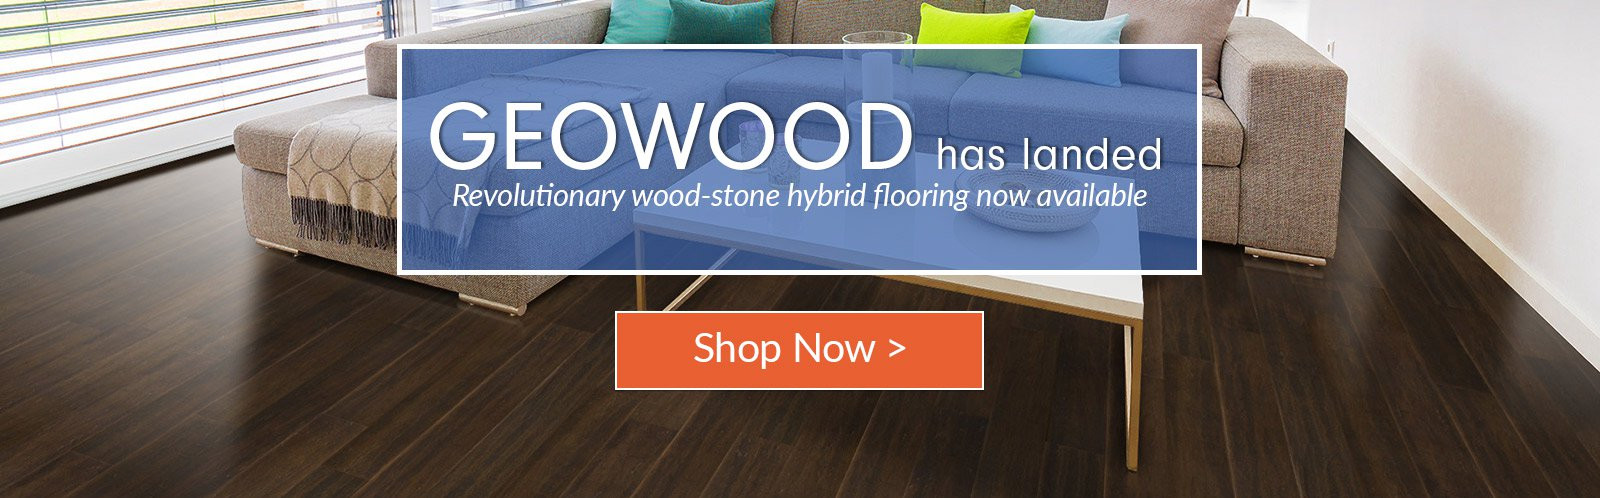 14 Famous Hardwood Flooring Ontario 2024 free download hardwood flooring ontario of green building construction materials and home decor cali bamboo with regard to geowood launch homepage slider